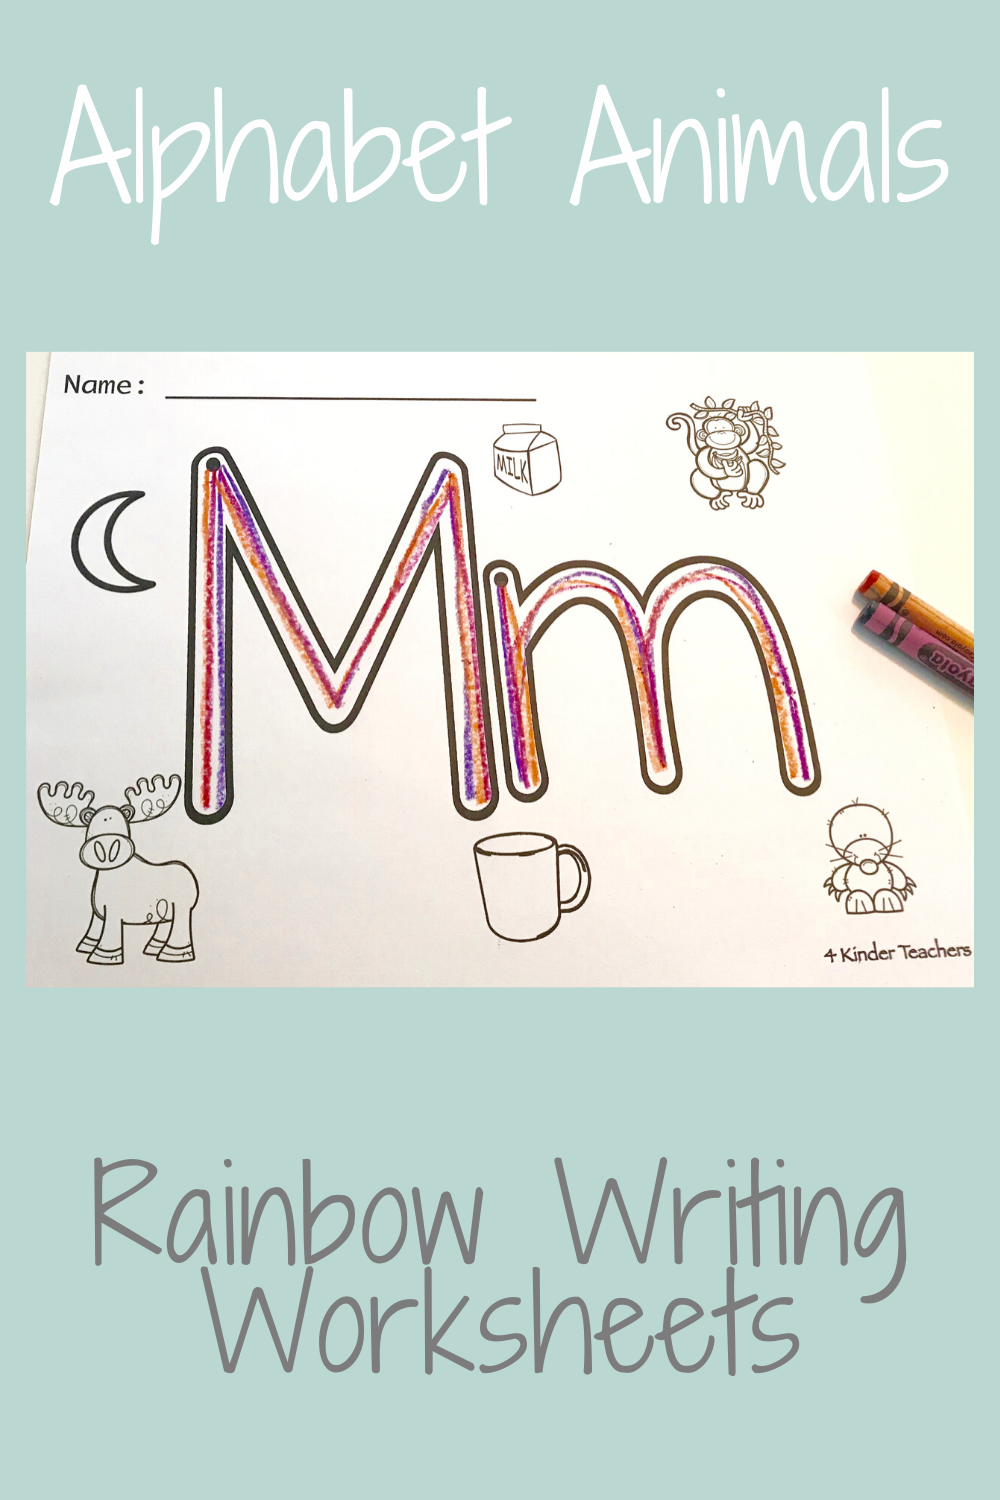 What Is Rainbow Writing - Fun, Engaging Activity - 4 Kinder